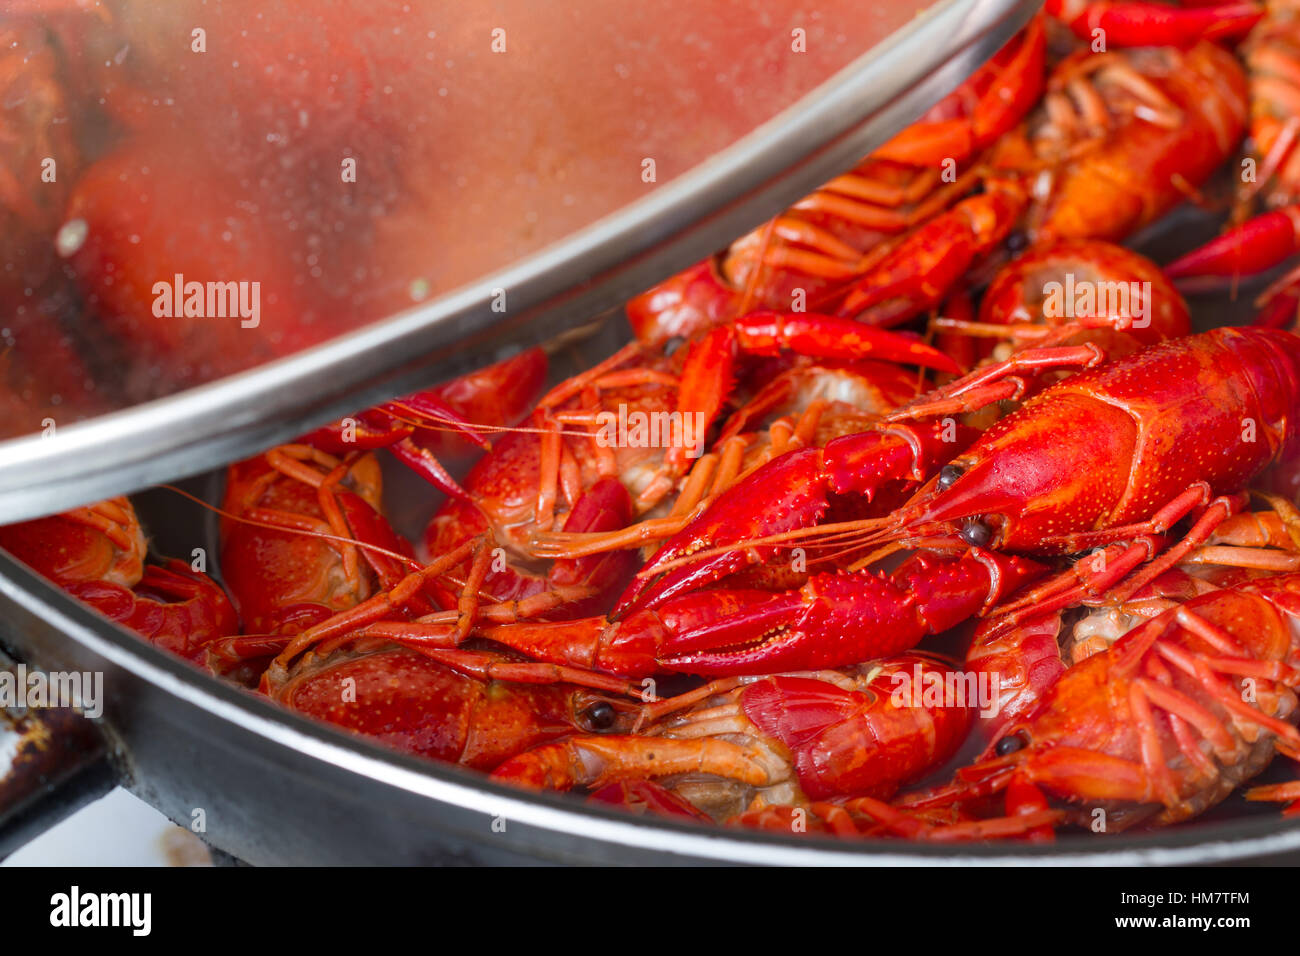 Crayfish in the pot and boiling water preparation Stock Photo